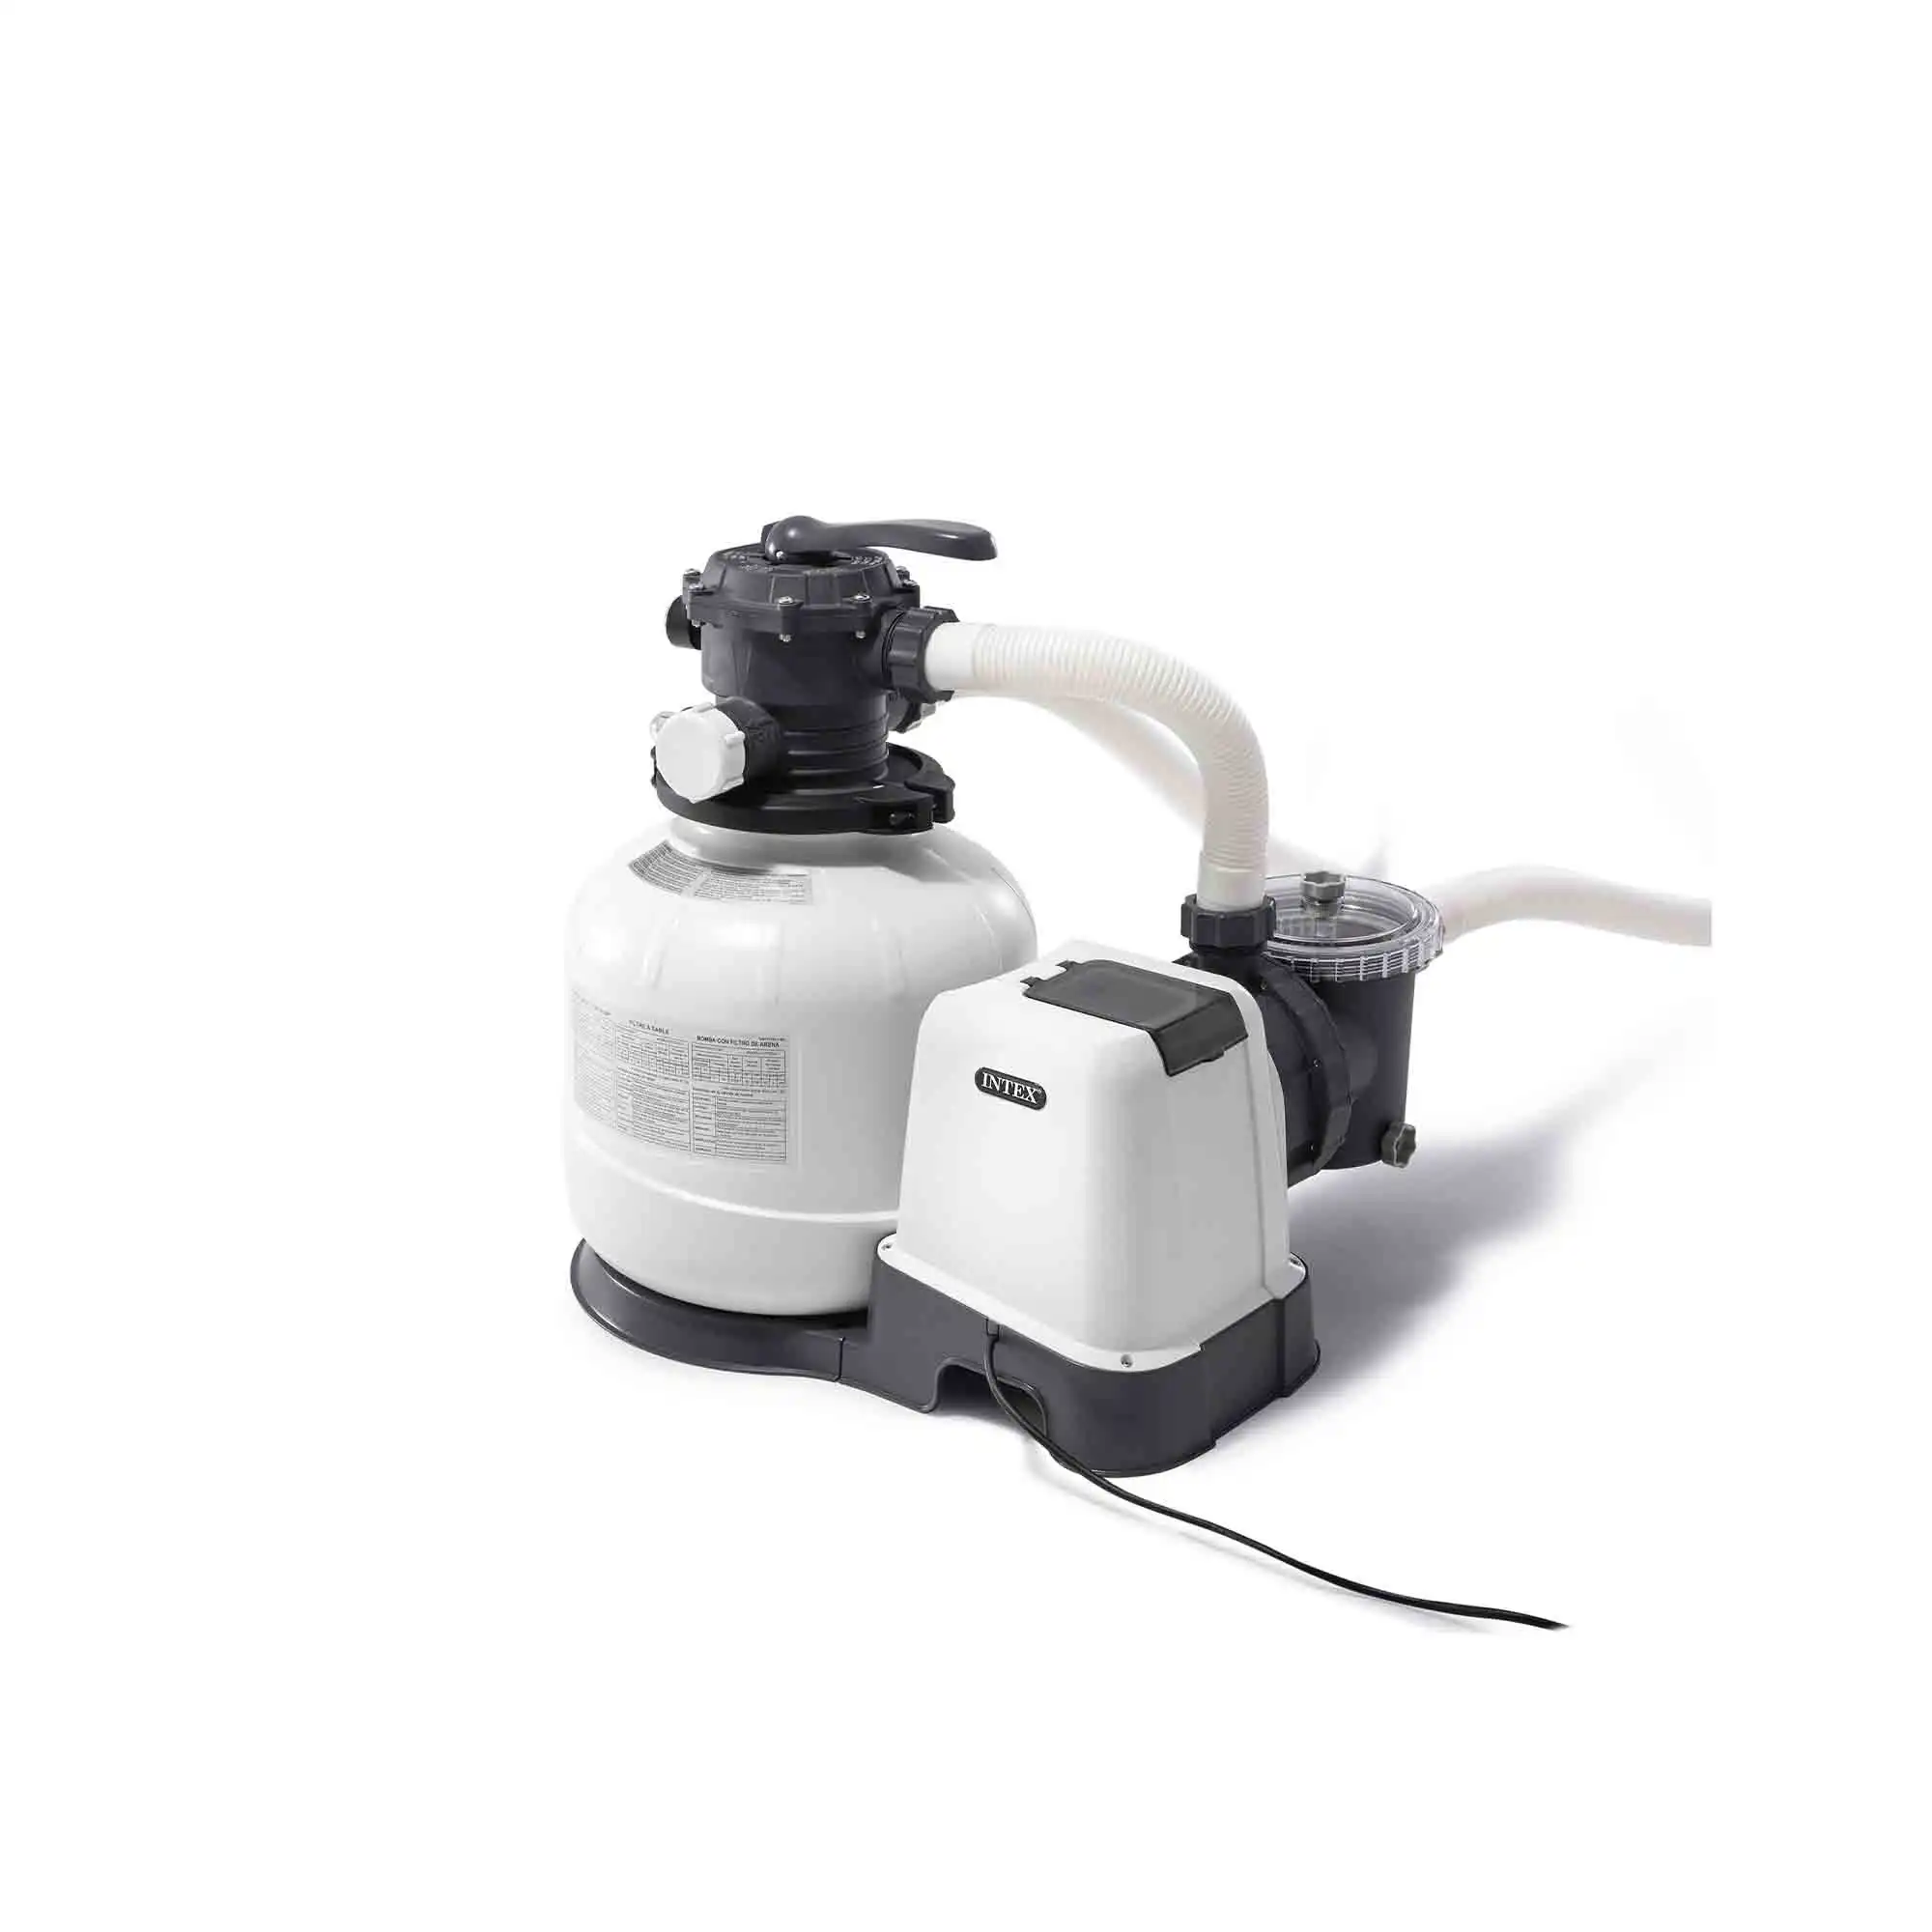 SX2800 Sand Filter Pump with RCD (220-240 V)